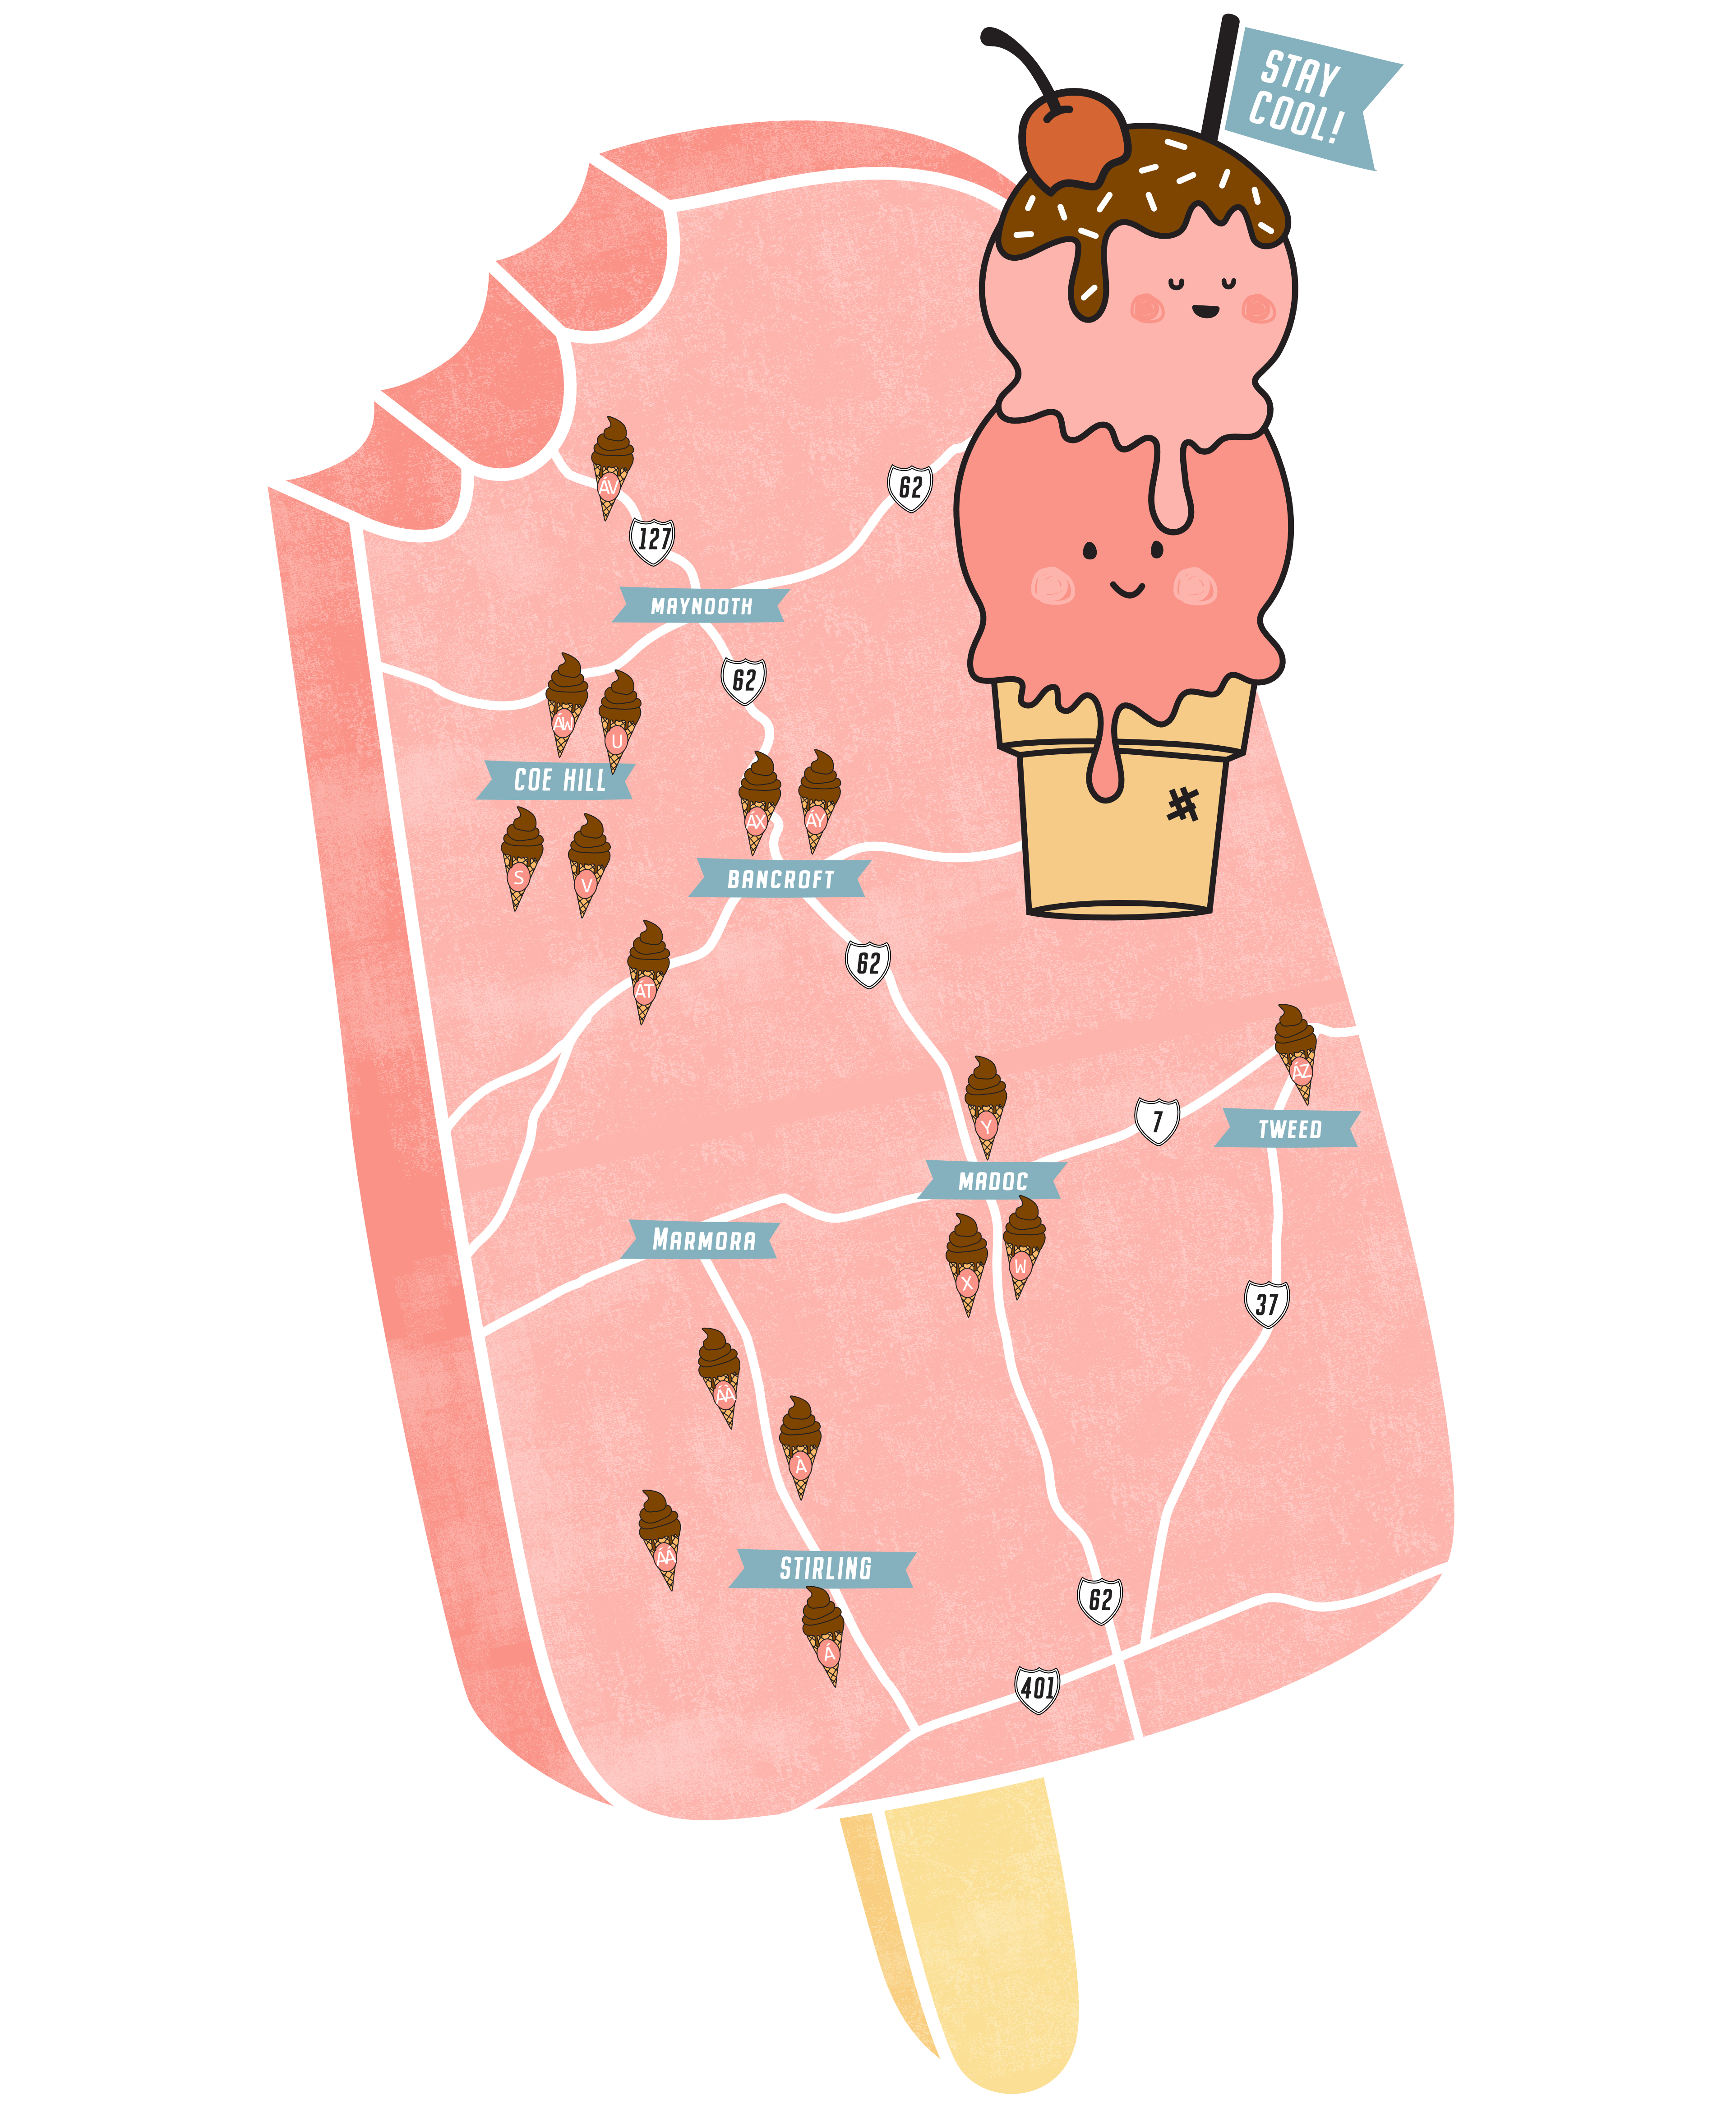 Fun design of a map in the shape of an ice cream bar identifying all ice cream locations in Hastings County